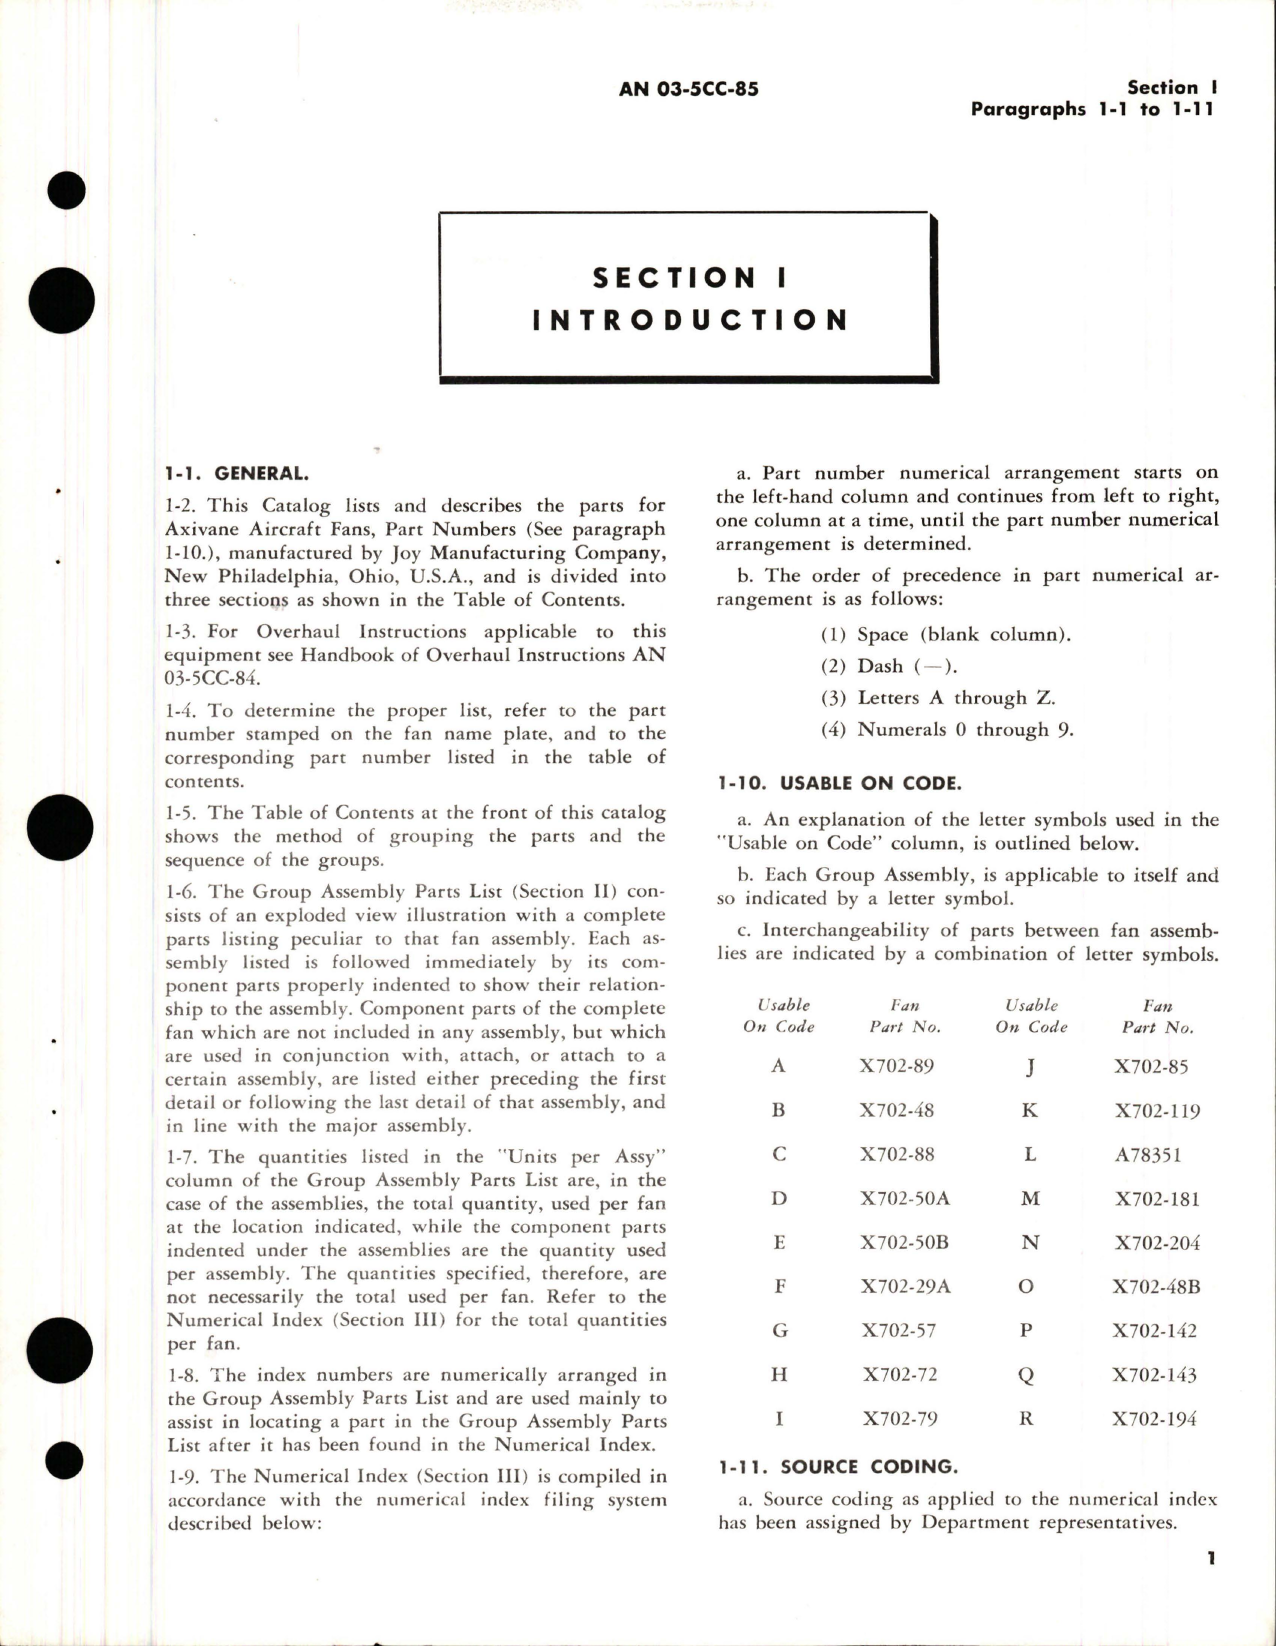 Sample page 5 from AirCorps Library document: Illustrated Parts Breakdown for Axivane Aircraft Fans - X702 Series 